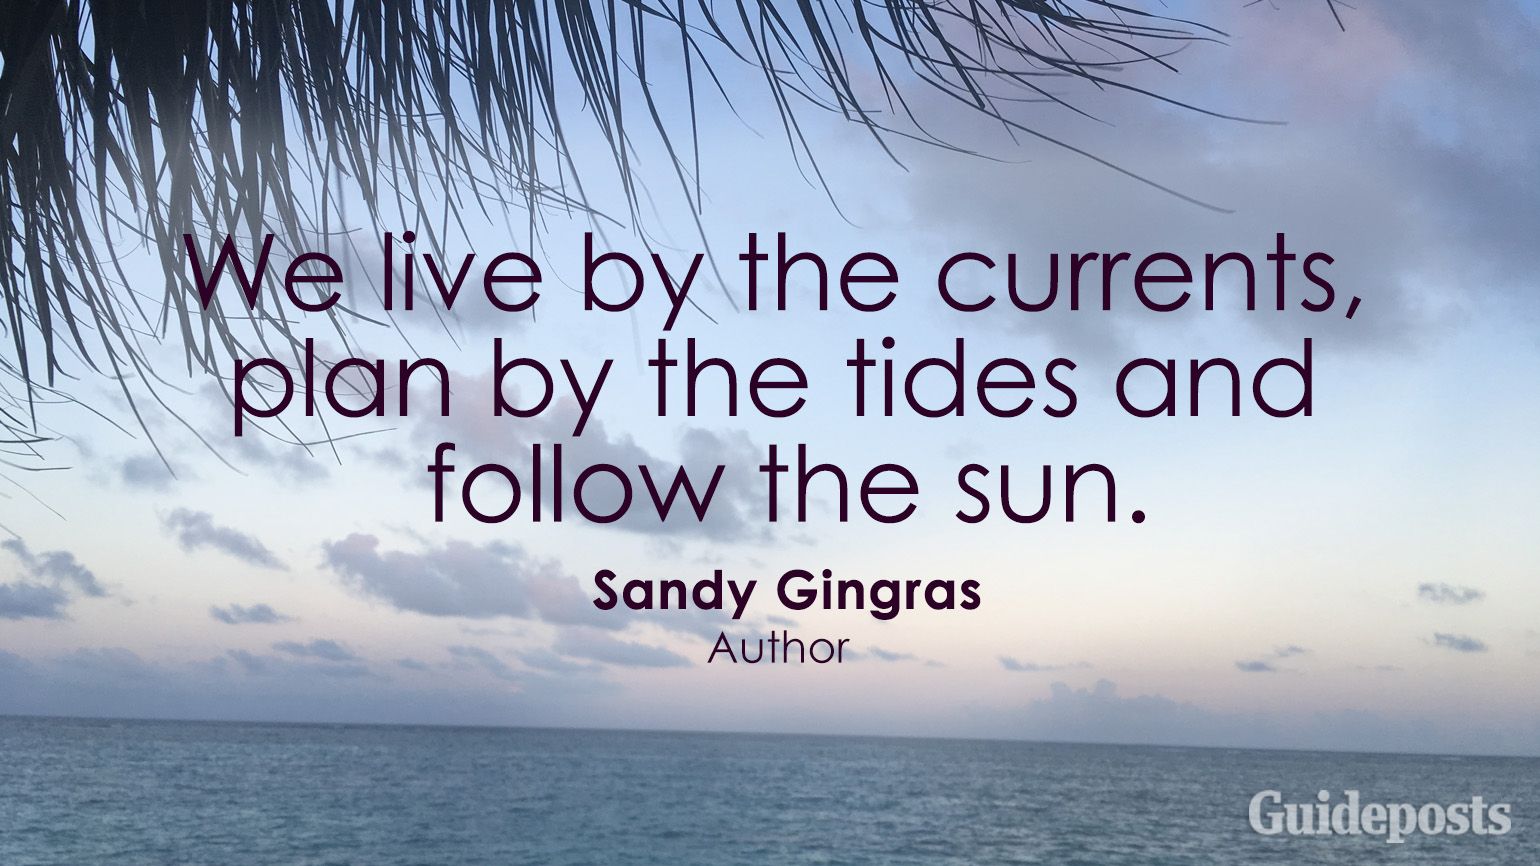 We live by the currents, plan by the tides and follow the sun. Sandy Gingras